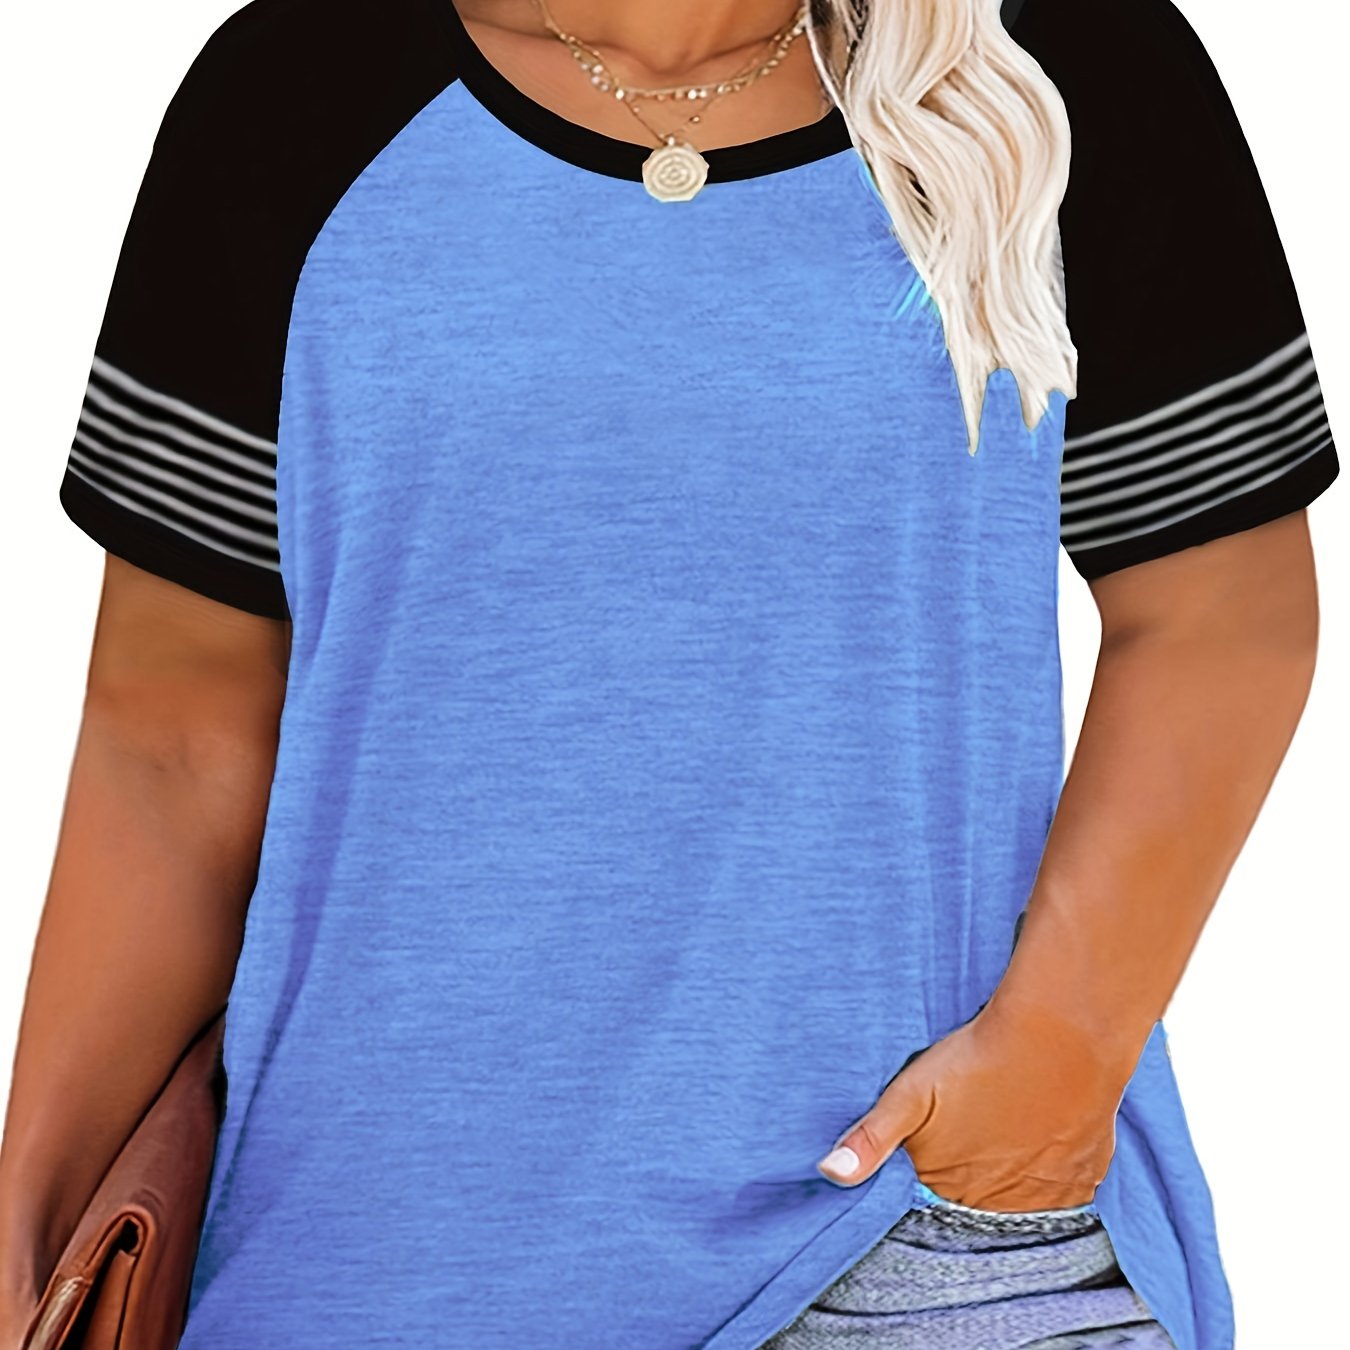 Vzyzv Women's Plus Size Colorblock Stripe Print T-Shirt - Comfortable and Stylish Short Sleeve Tee with Slight Stretch